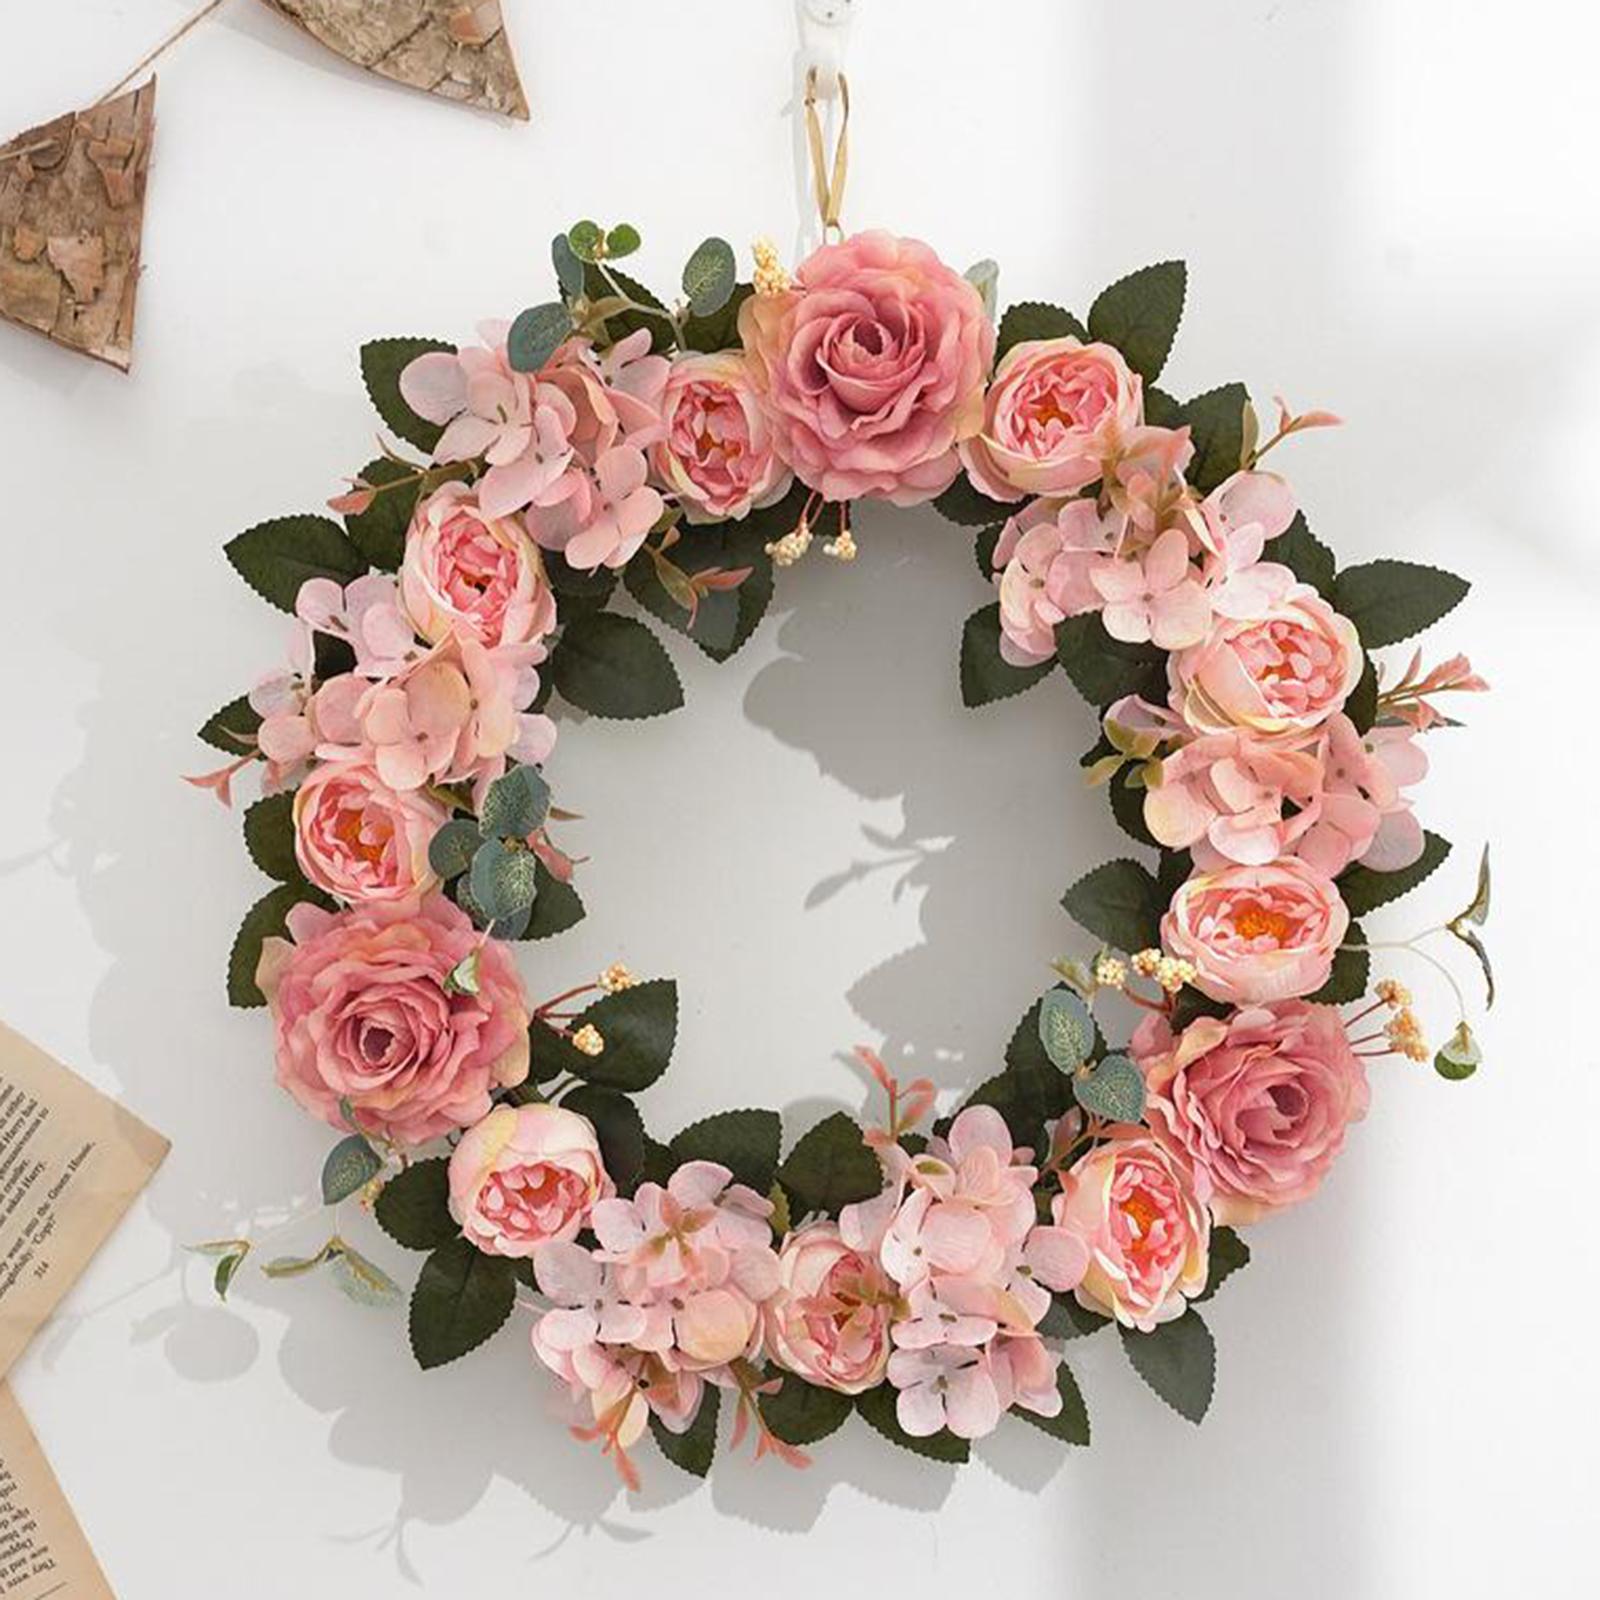 Silk Flower Peony Door Wreath for Holiday, Crafts,or Decoration Pink